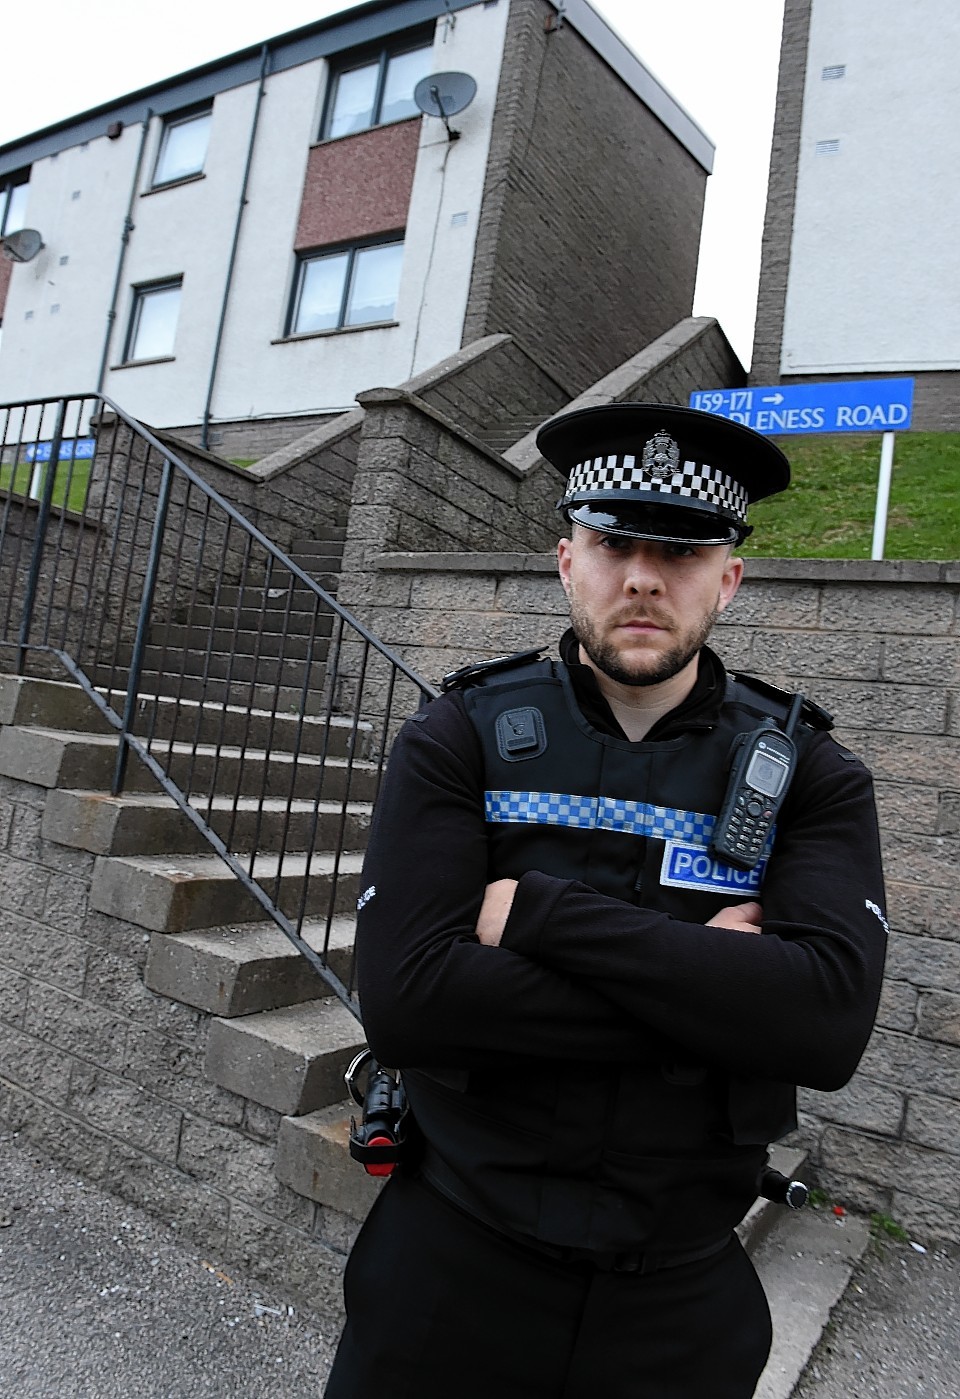 Sergeant Martyn Thomson at the steps where the man fell and the thief struck. Picture by Jim Irvine